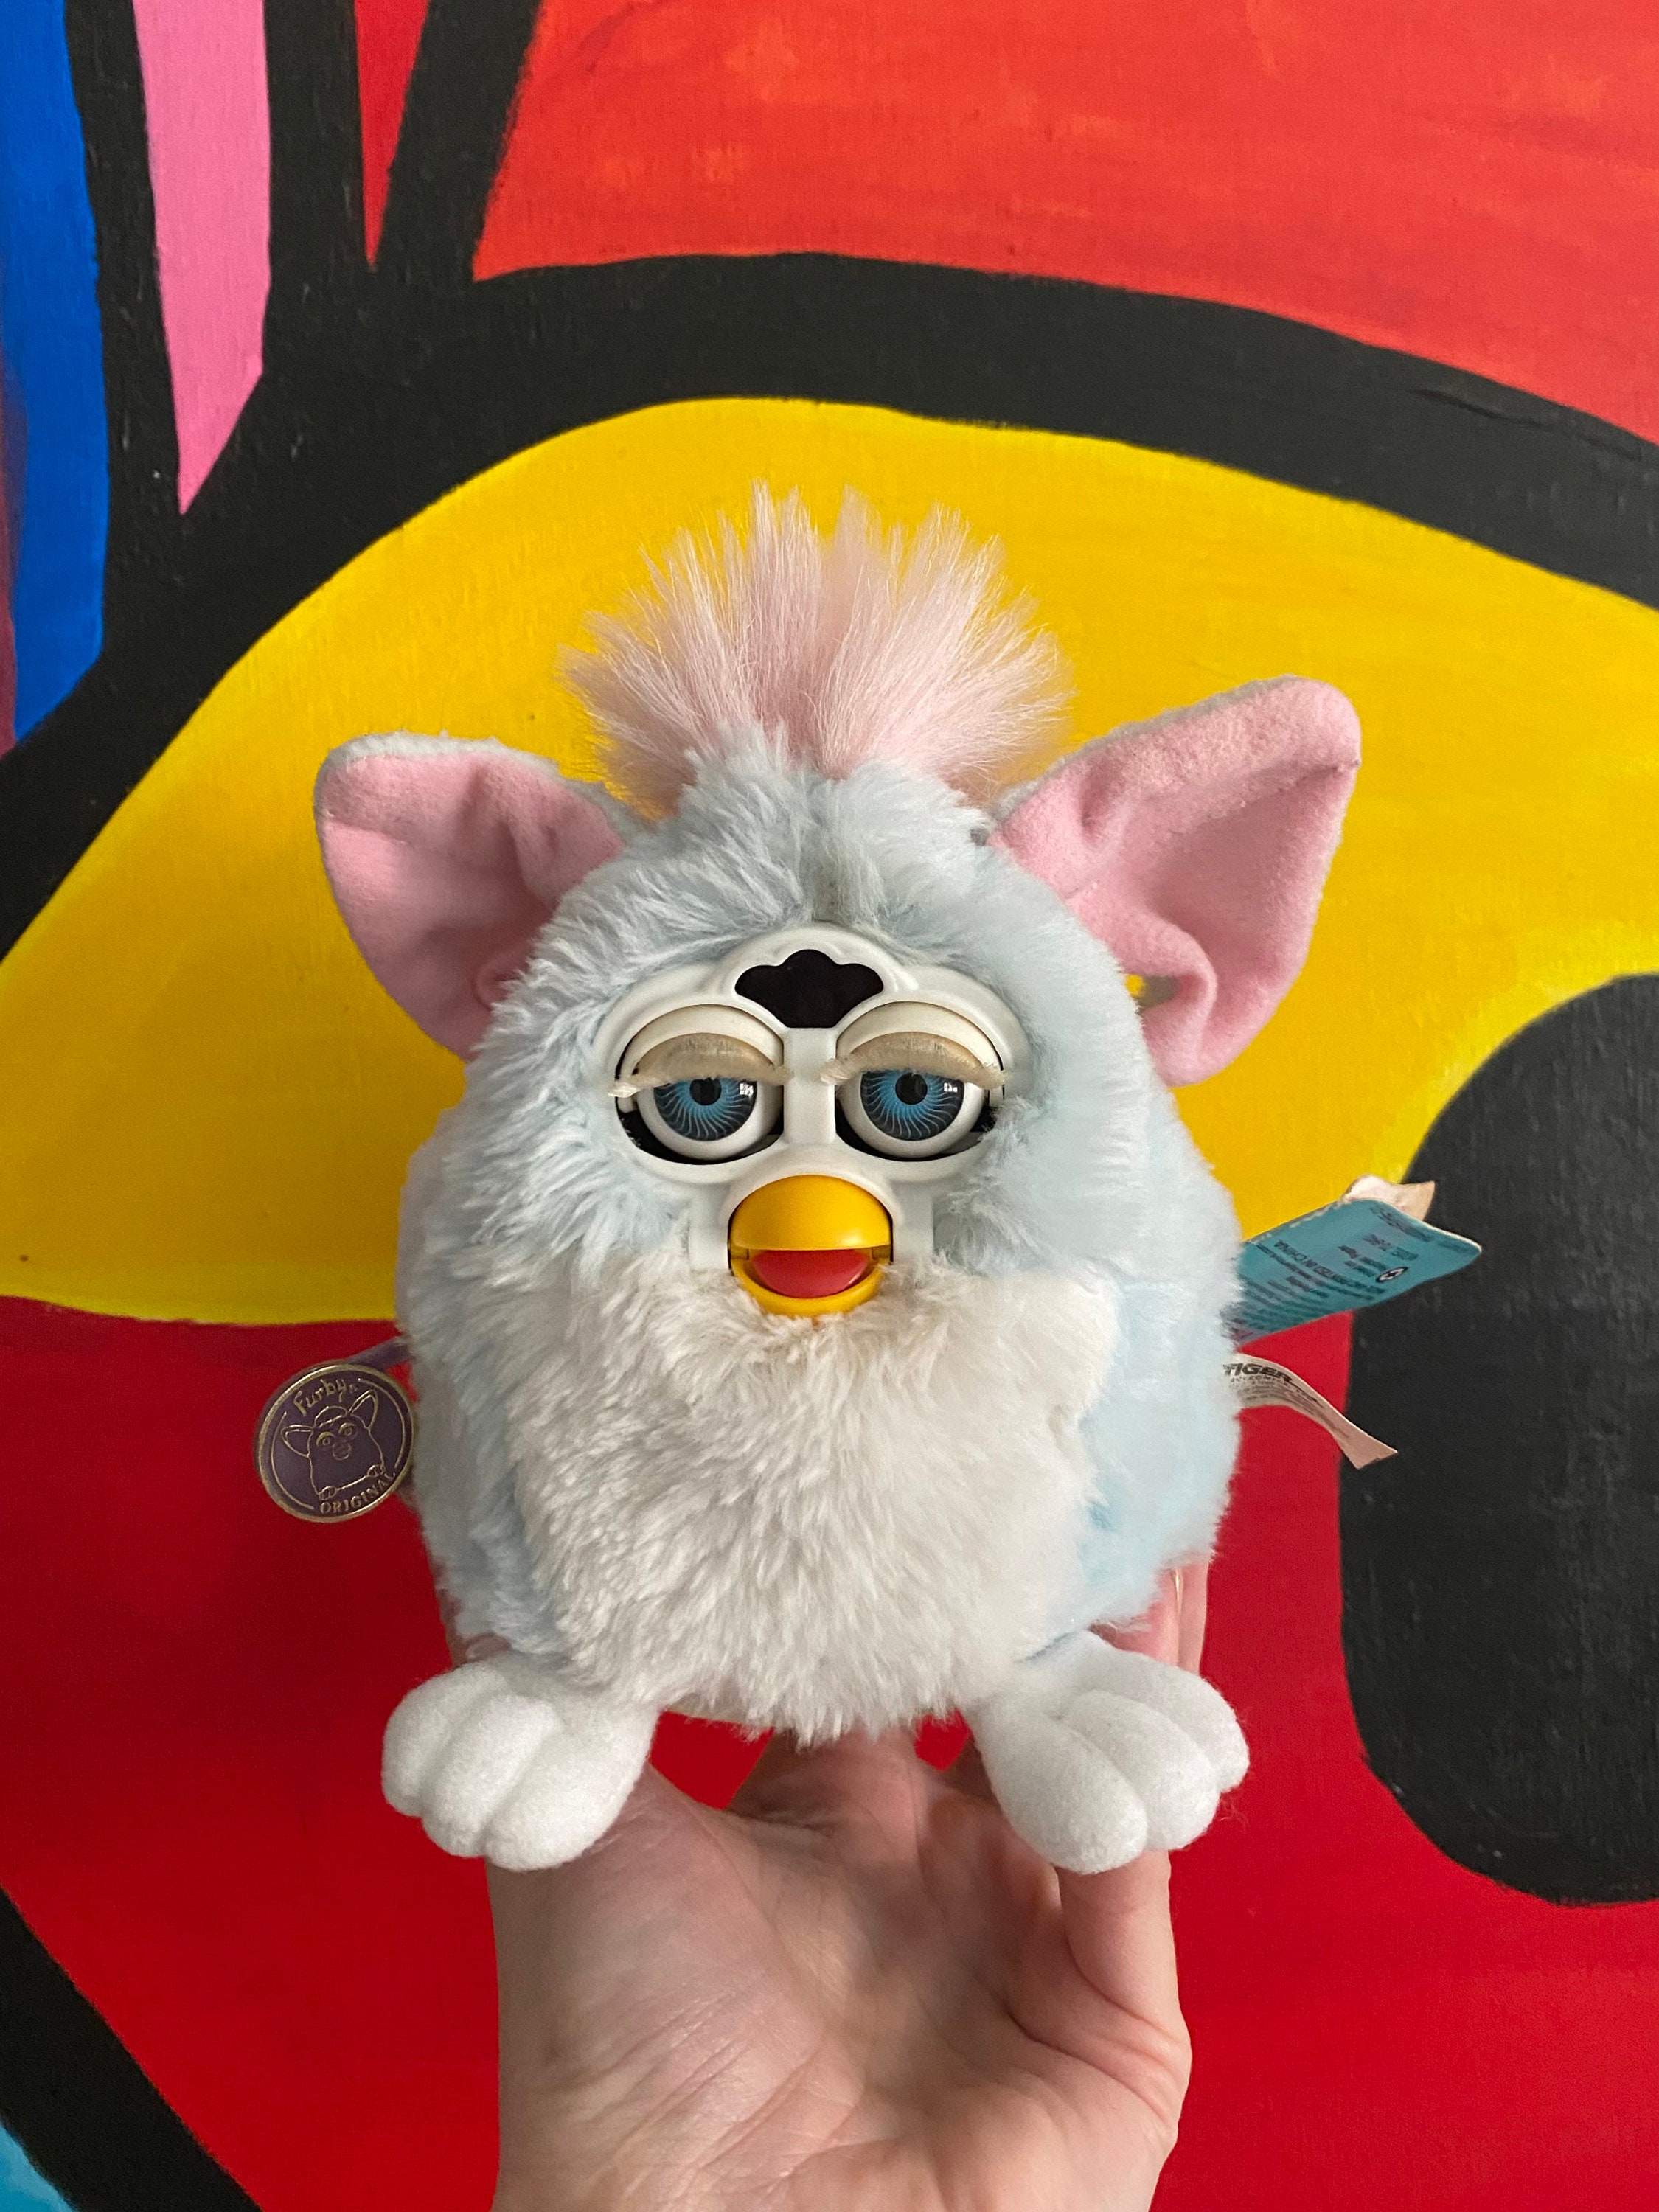  1998 Furby Black with Blue Eyes, Pink Ears and White